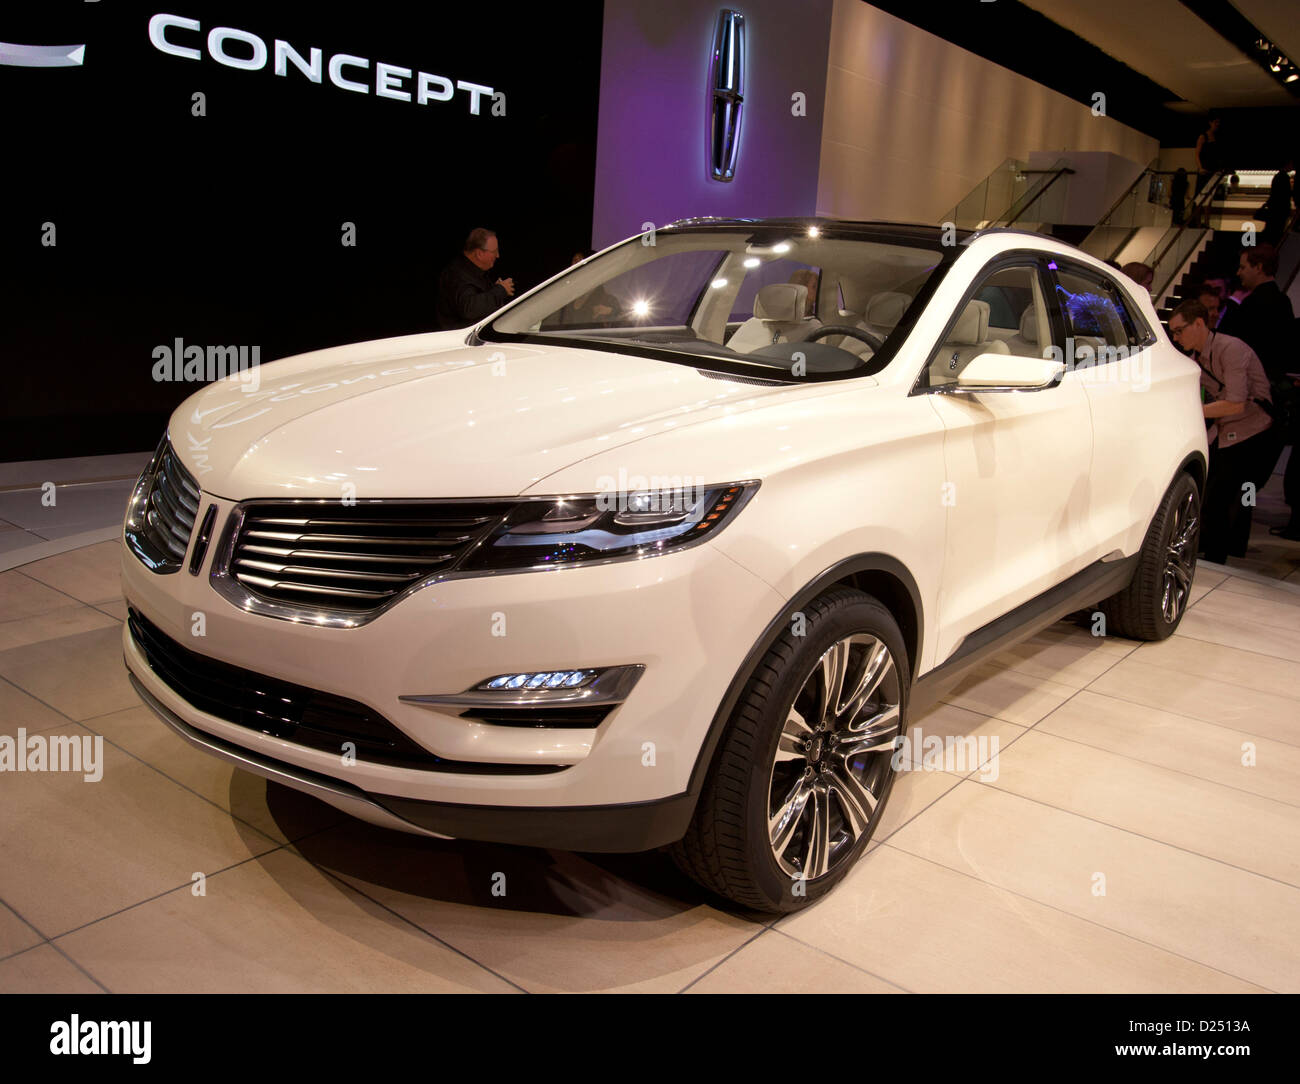 2013 North American International Auto Show, Detroit, Michigan. Lincoln MKC crossover concept car introduced. Stock Photo